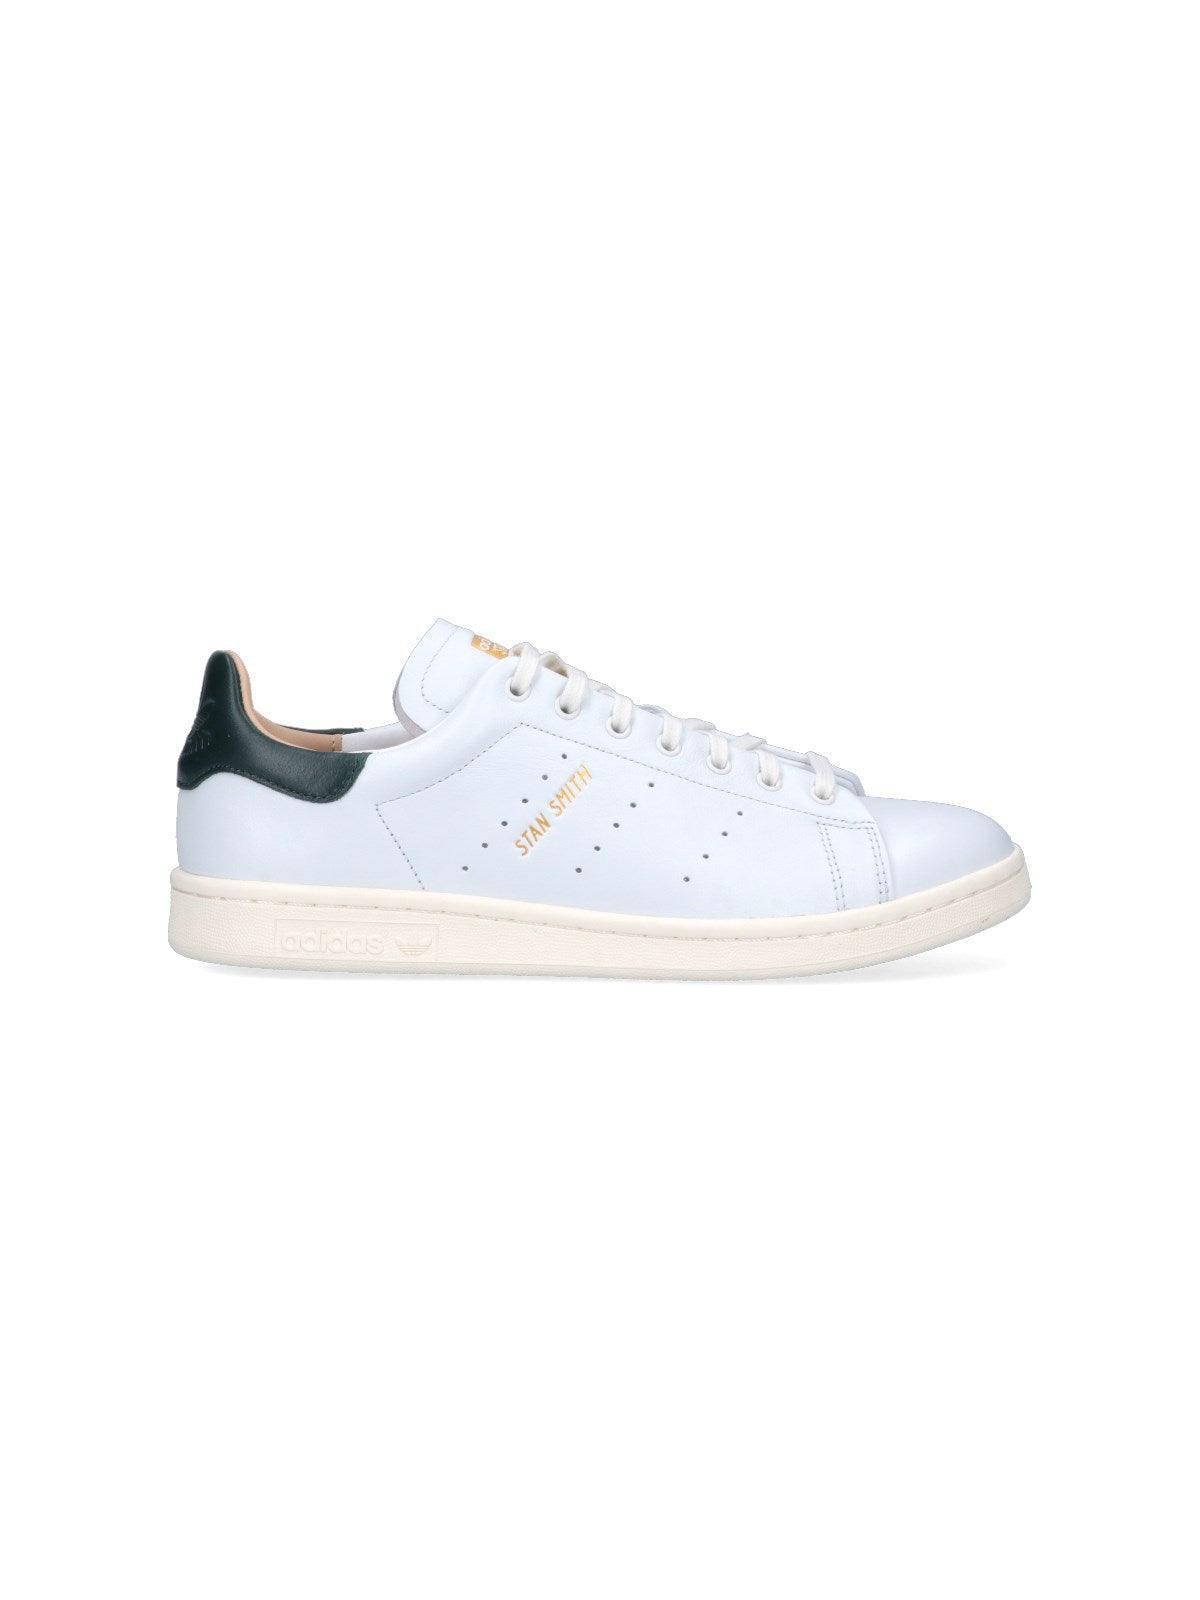 adidas Gender Inclusive Stan Smith Lux Sneaker